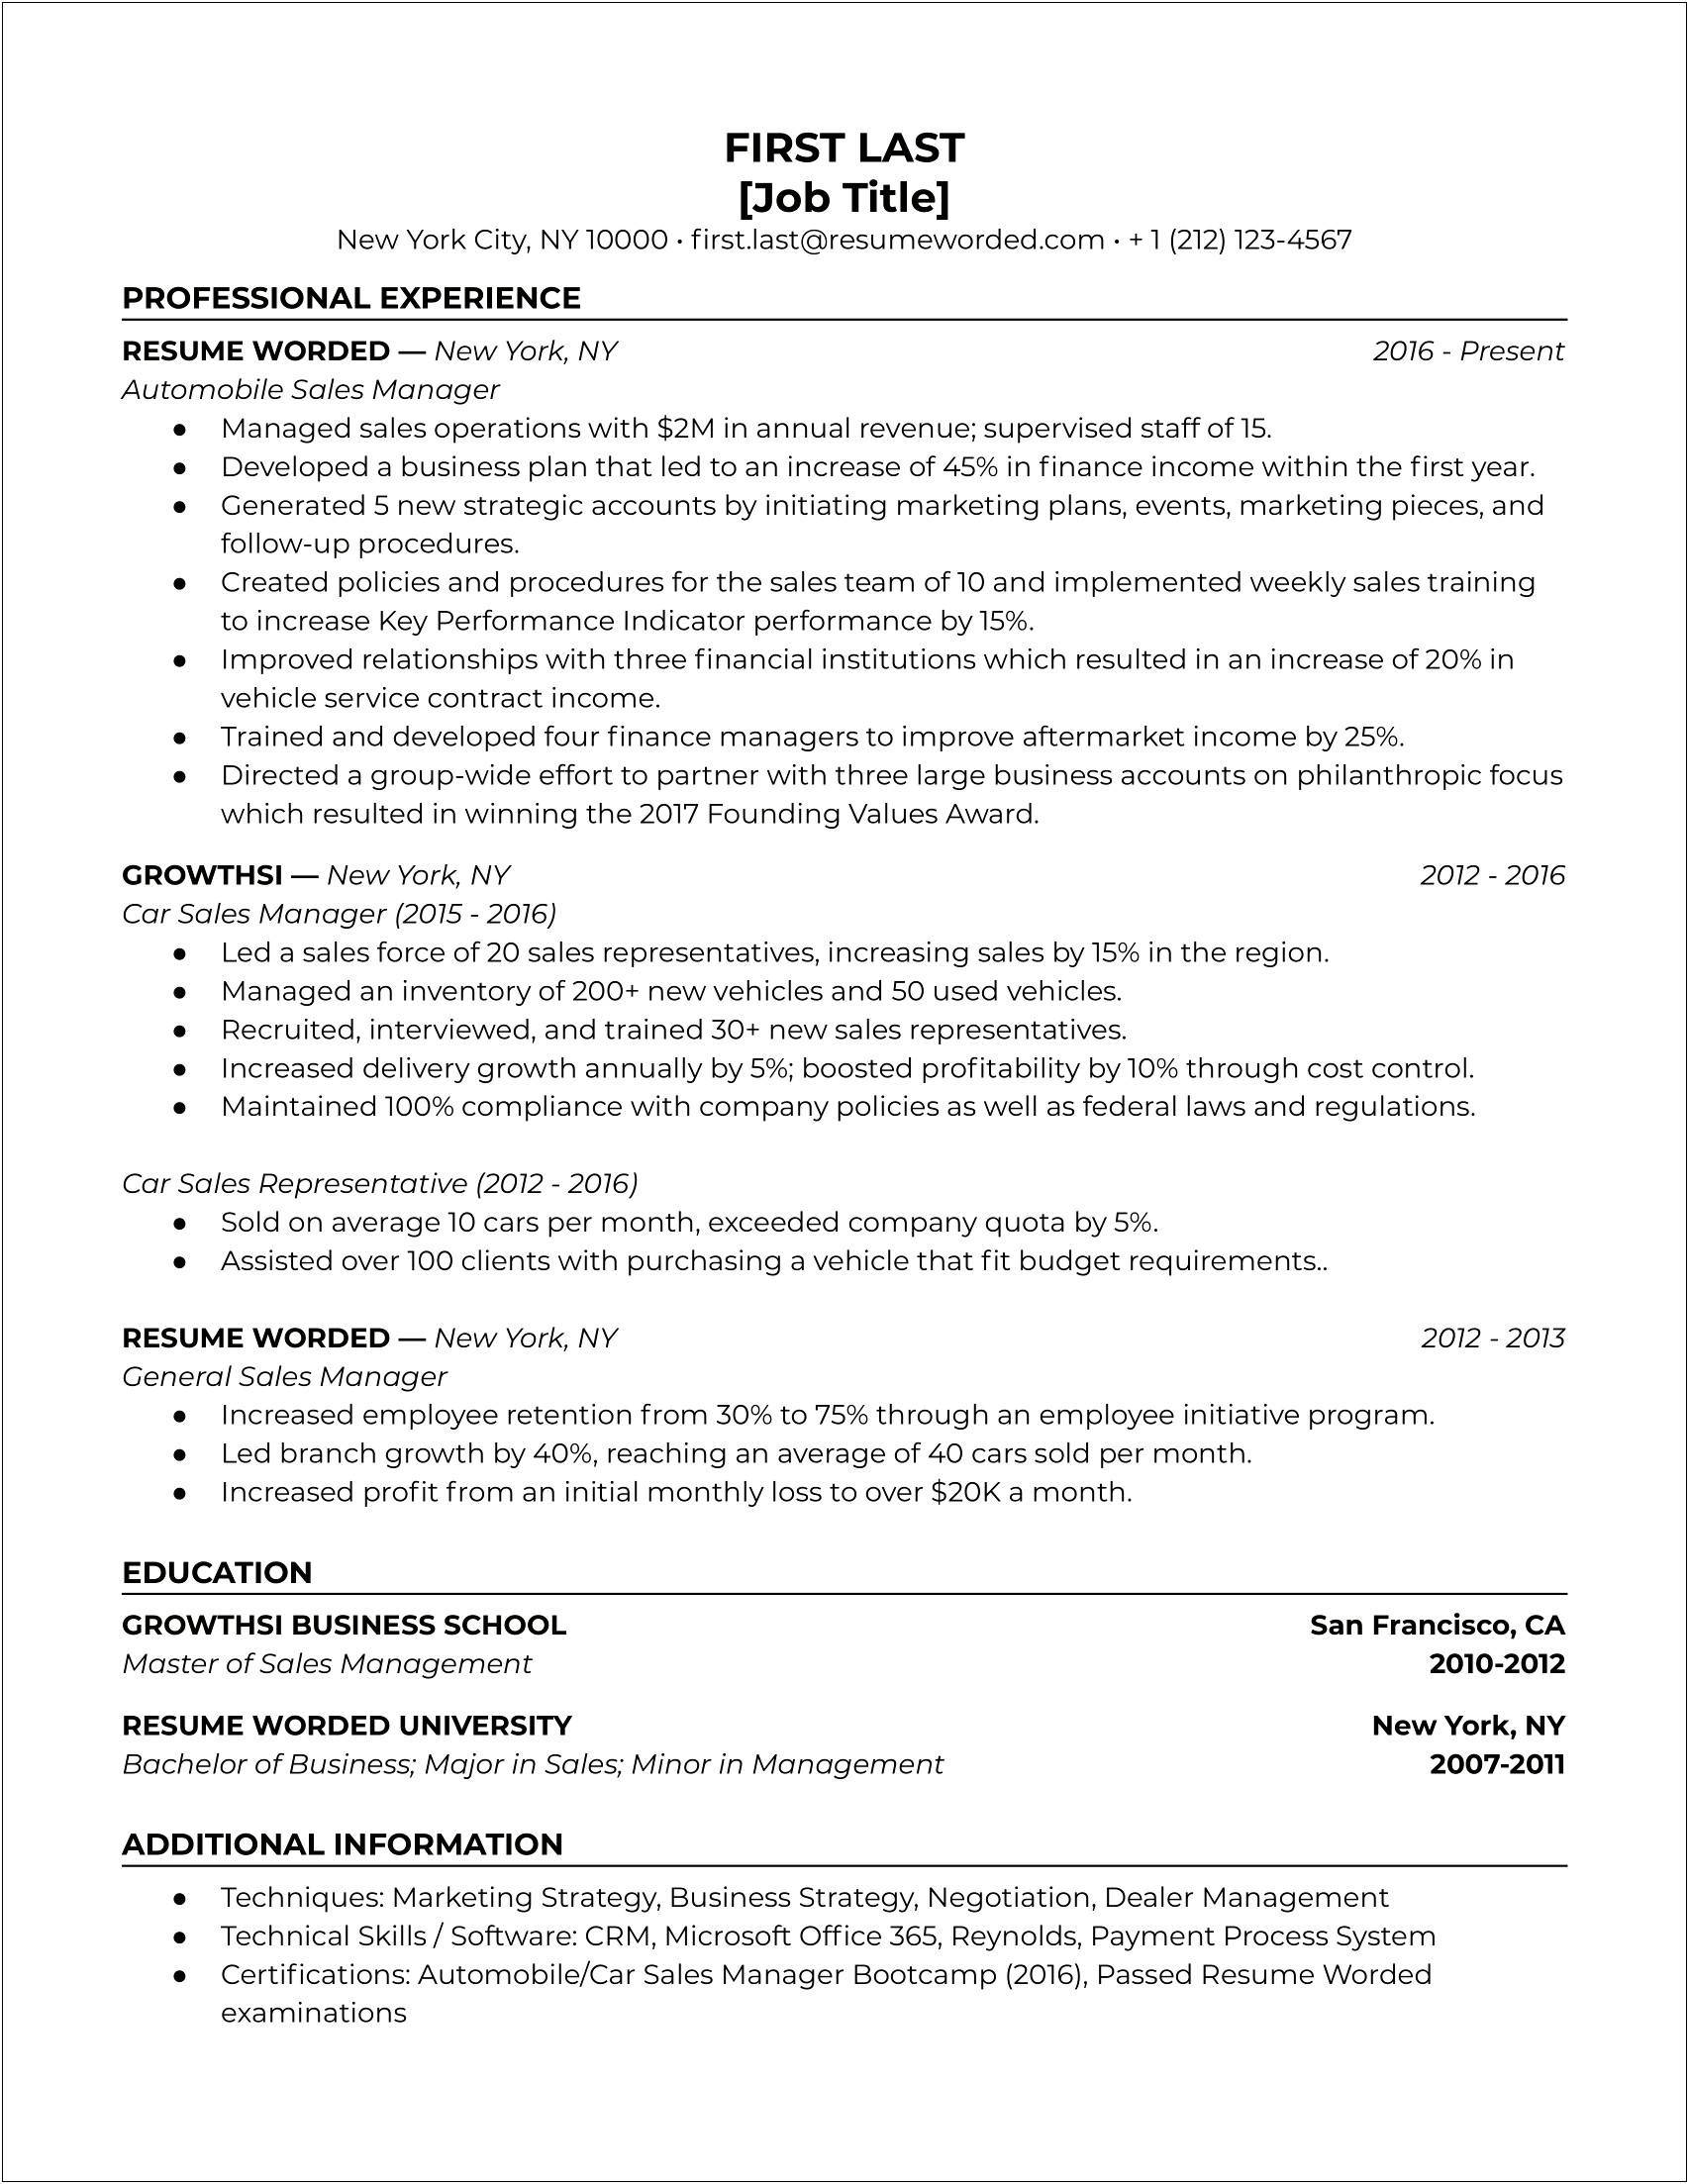 Resume Objective Hotel Sales Manager